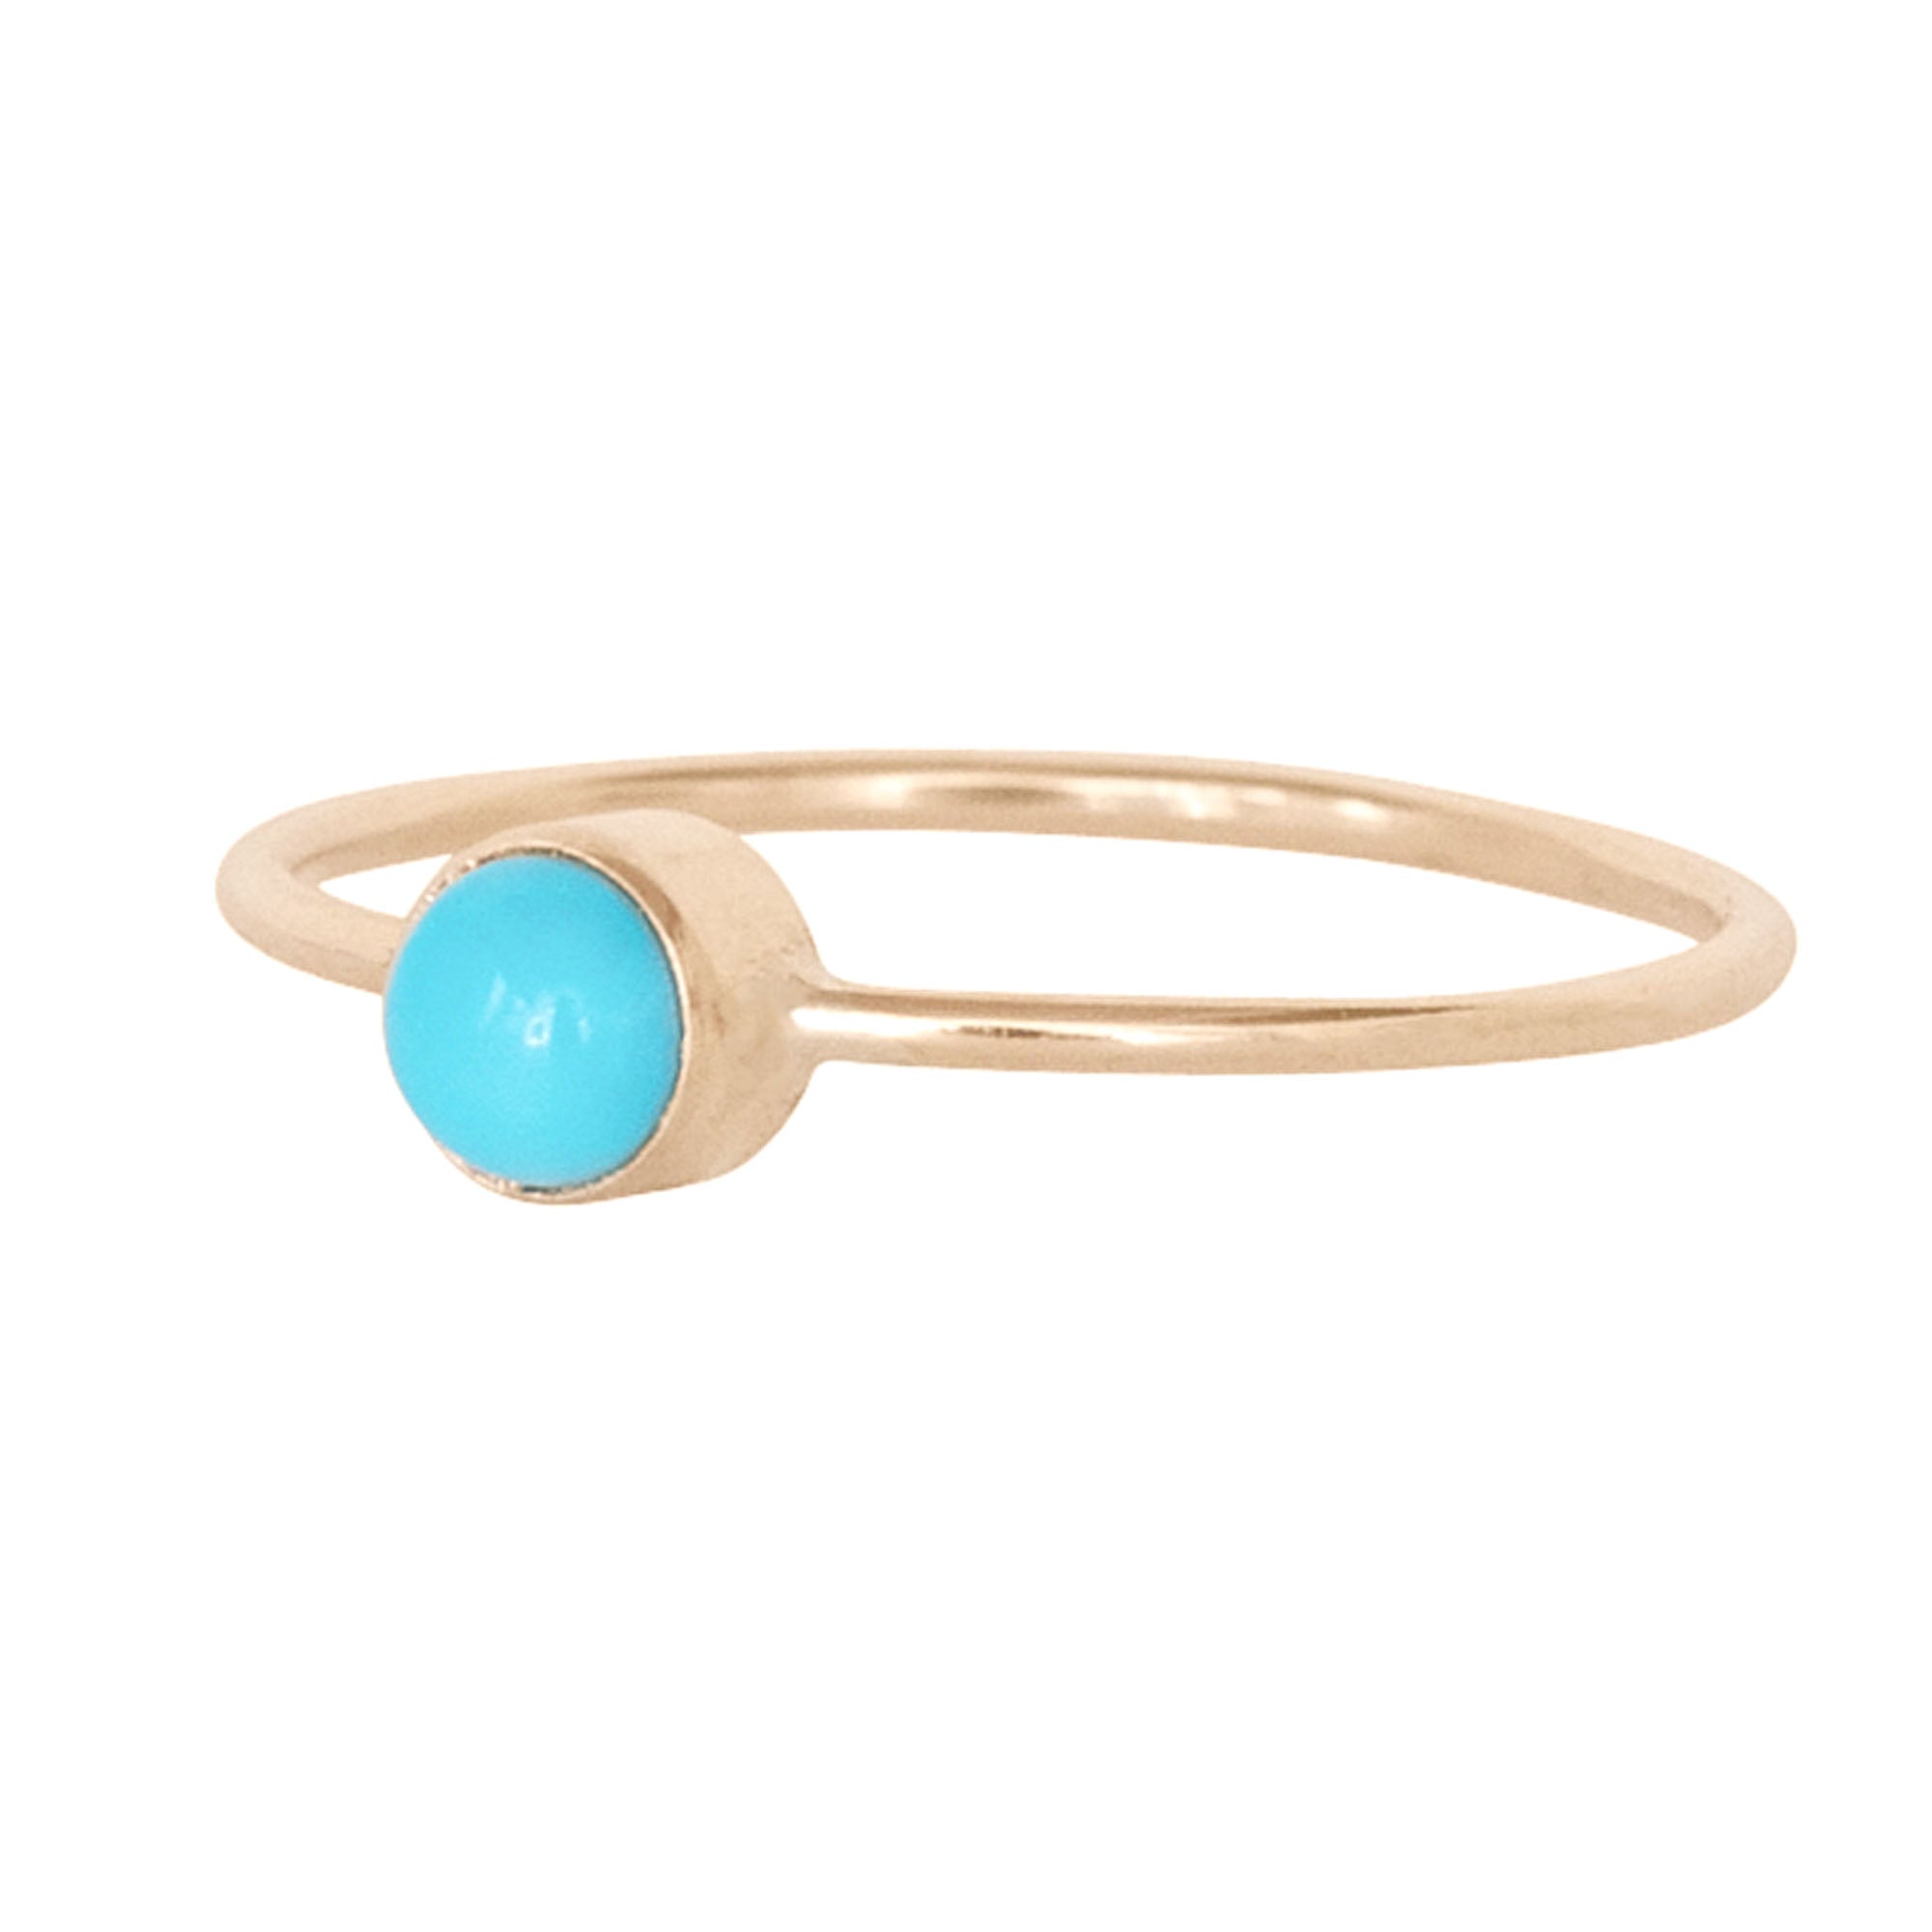 Turquoise Circa Ring 14k Gold Fill - Favor Jewelry